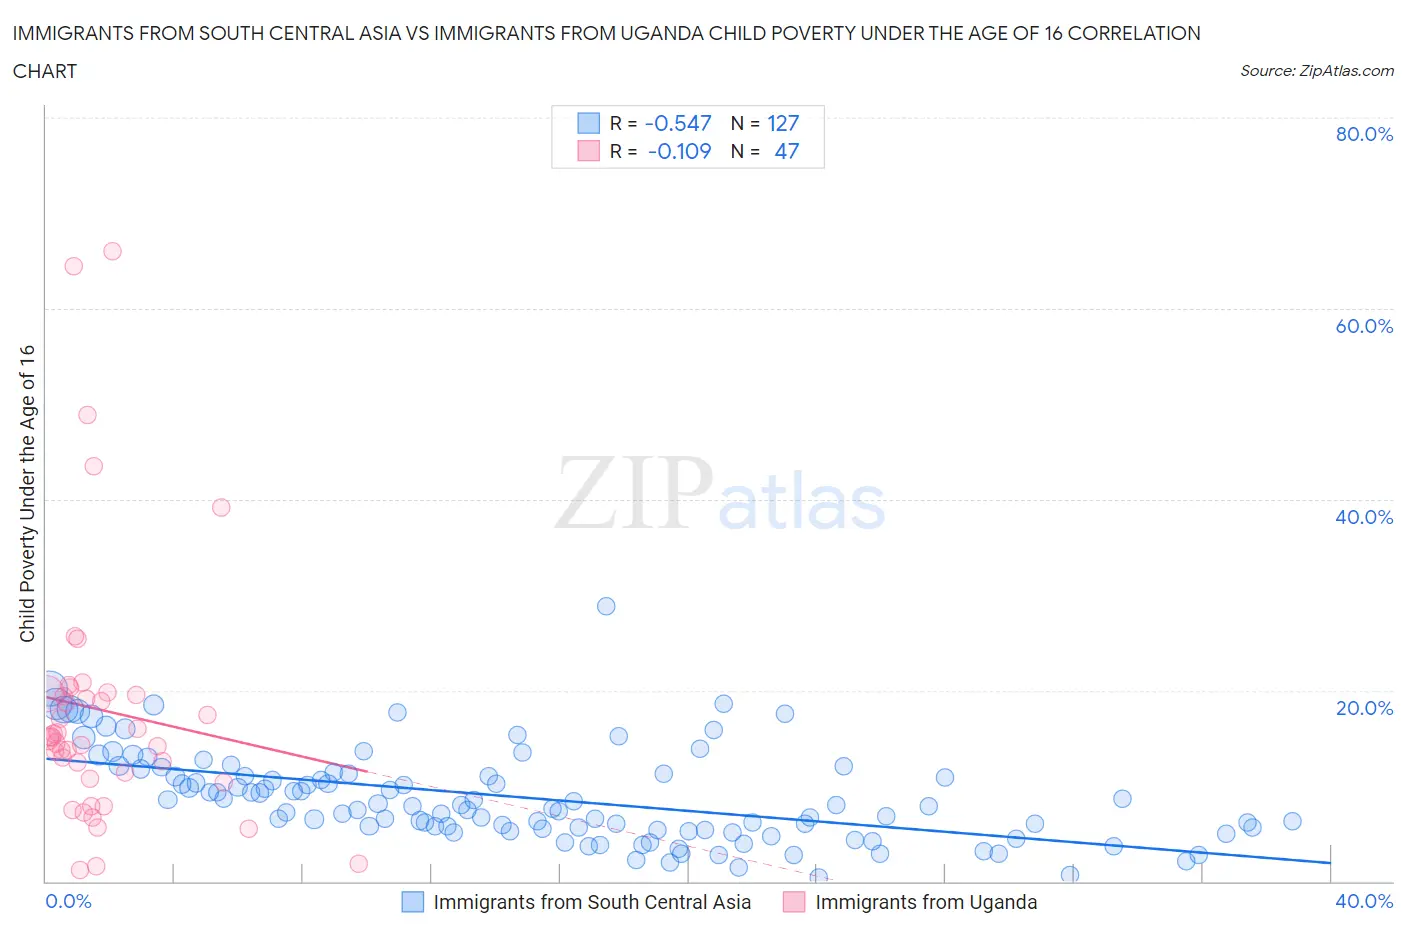 Immigrants from South Central Asia vs Immigrants from Uganda Child Poverty Under the Age of 16